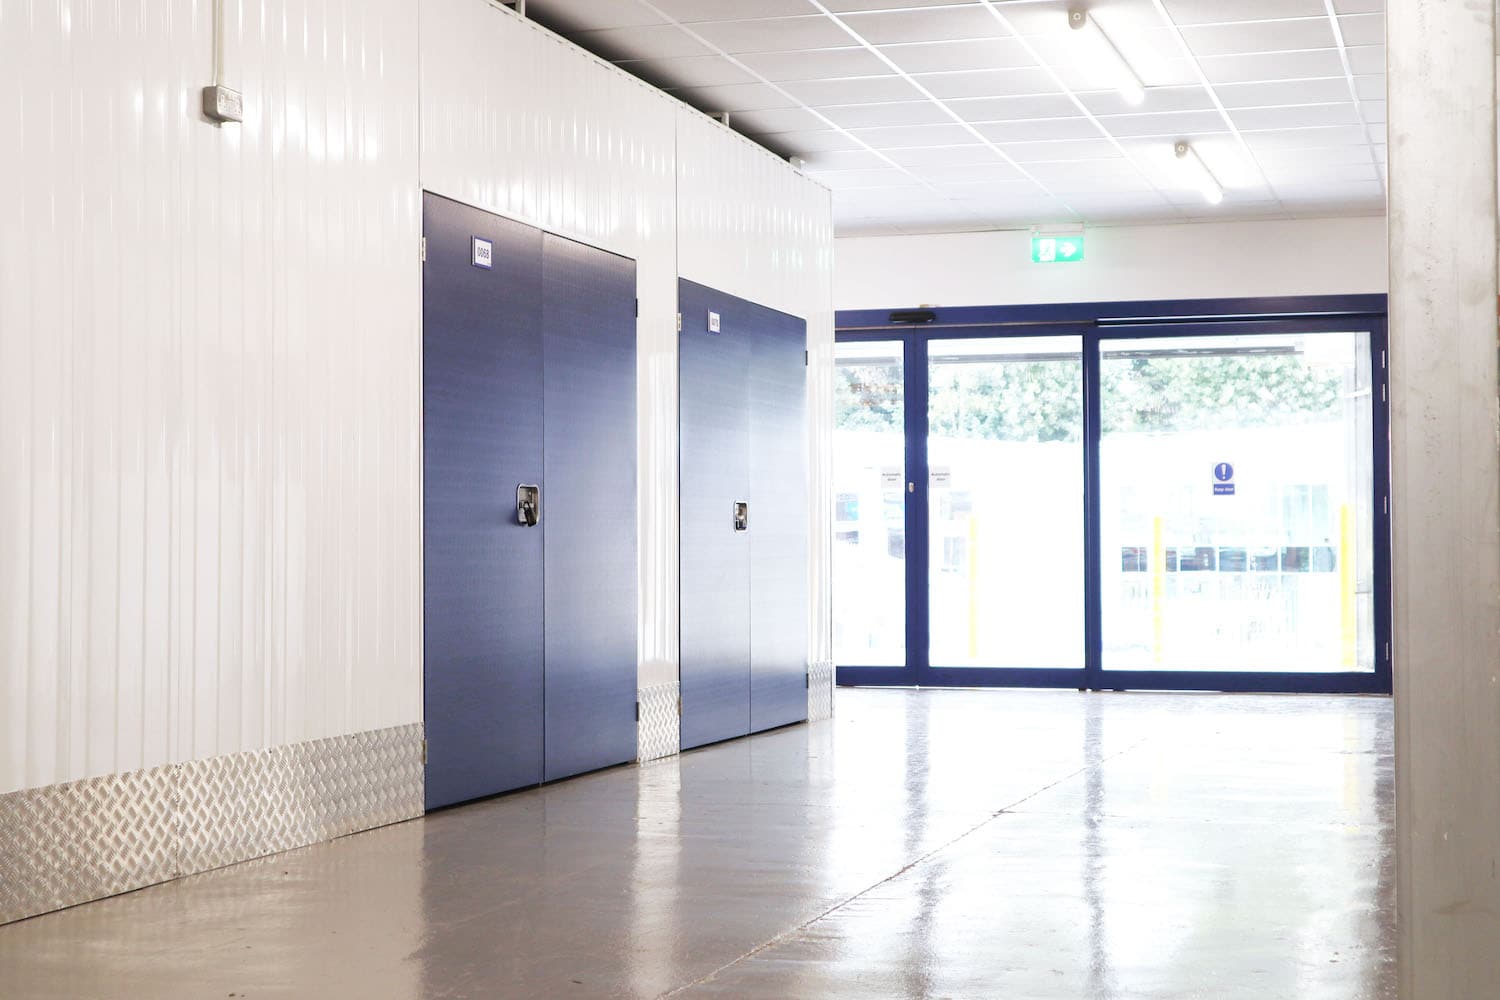 5 reasons to rent a storage unit in Chippenham. Image shows two blue doors to two storage units and a large glass sliding door at the end of the interior.